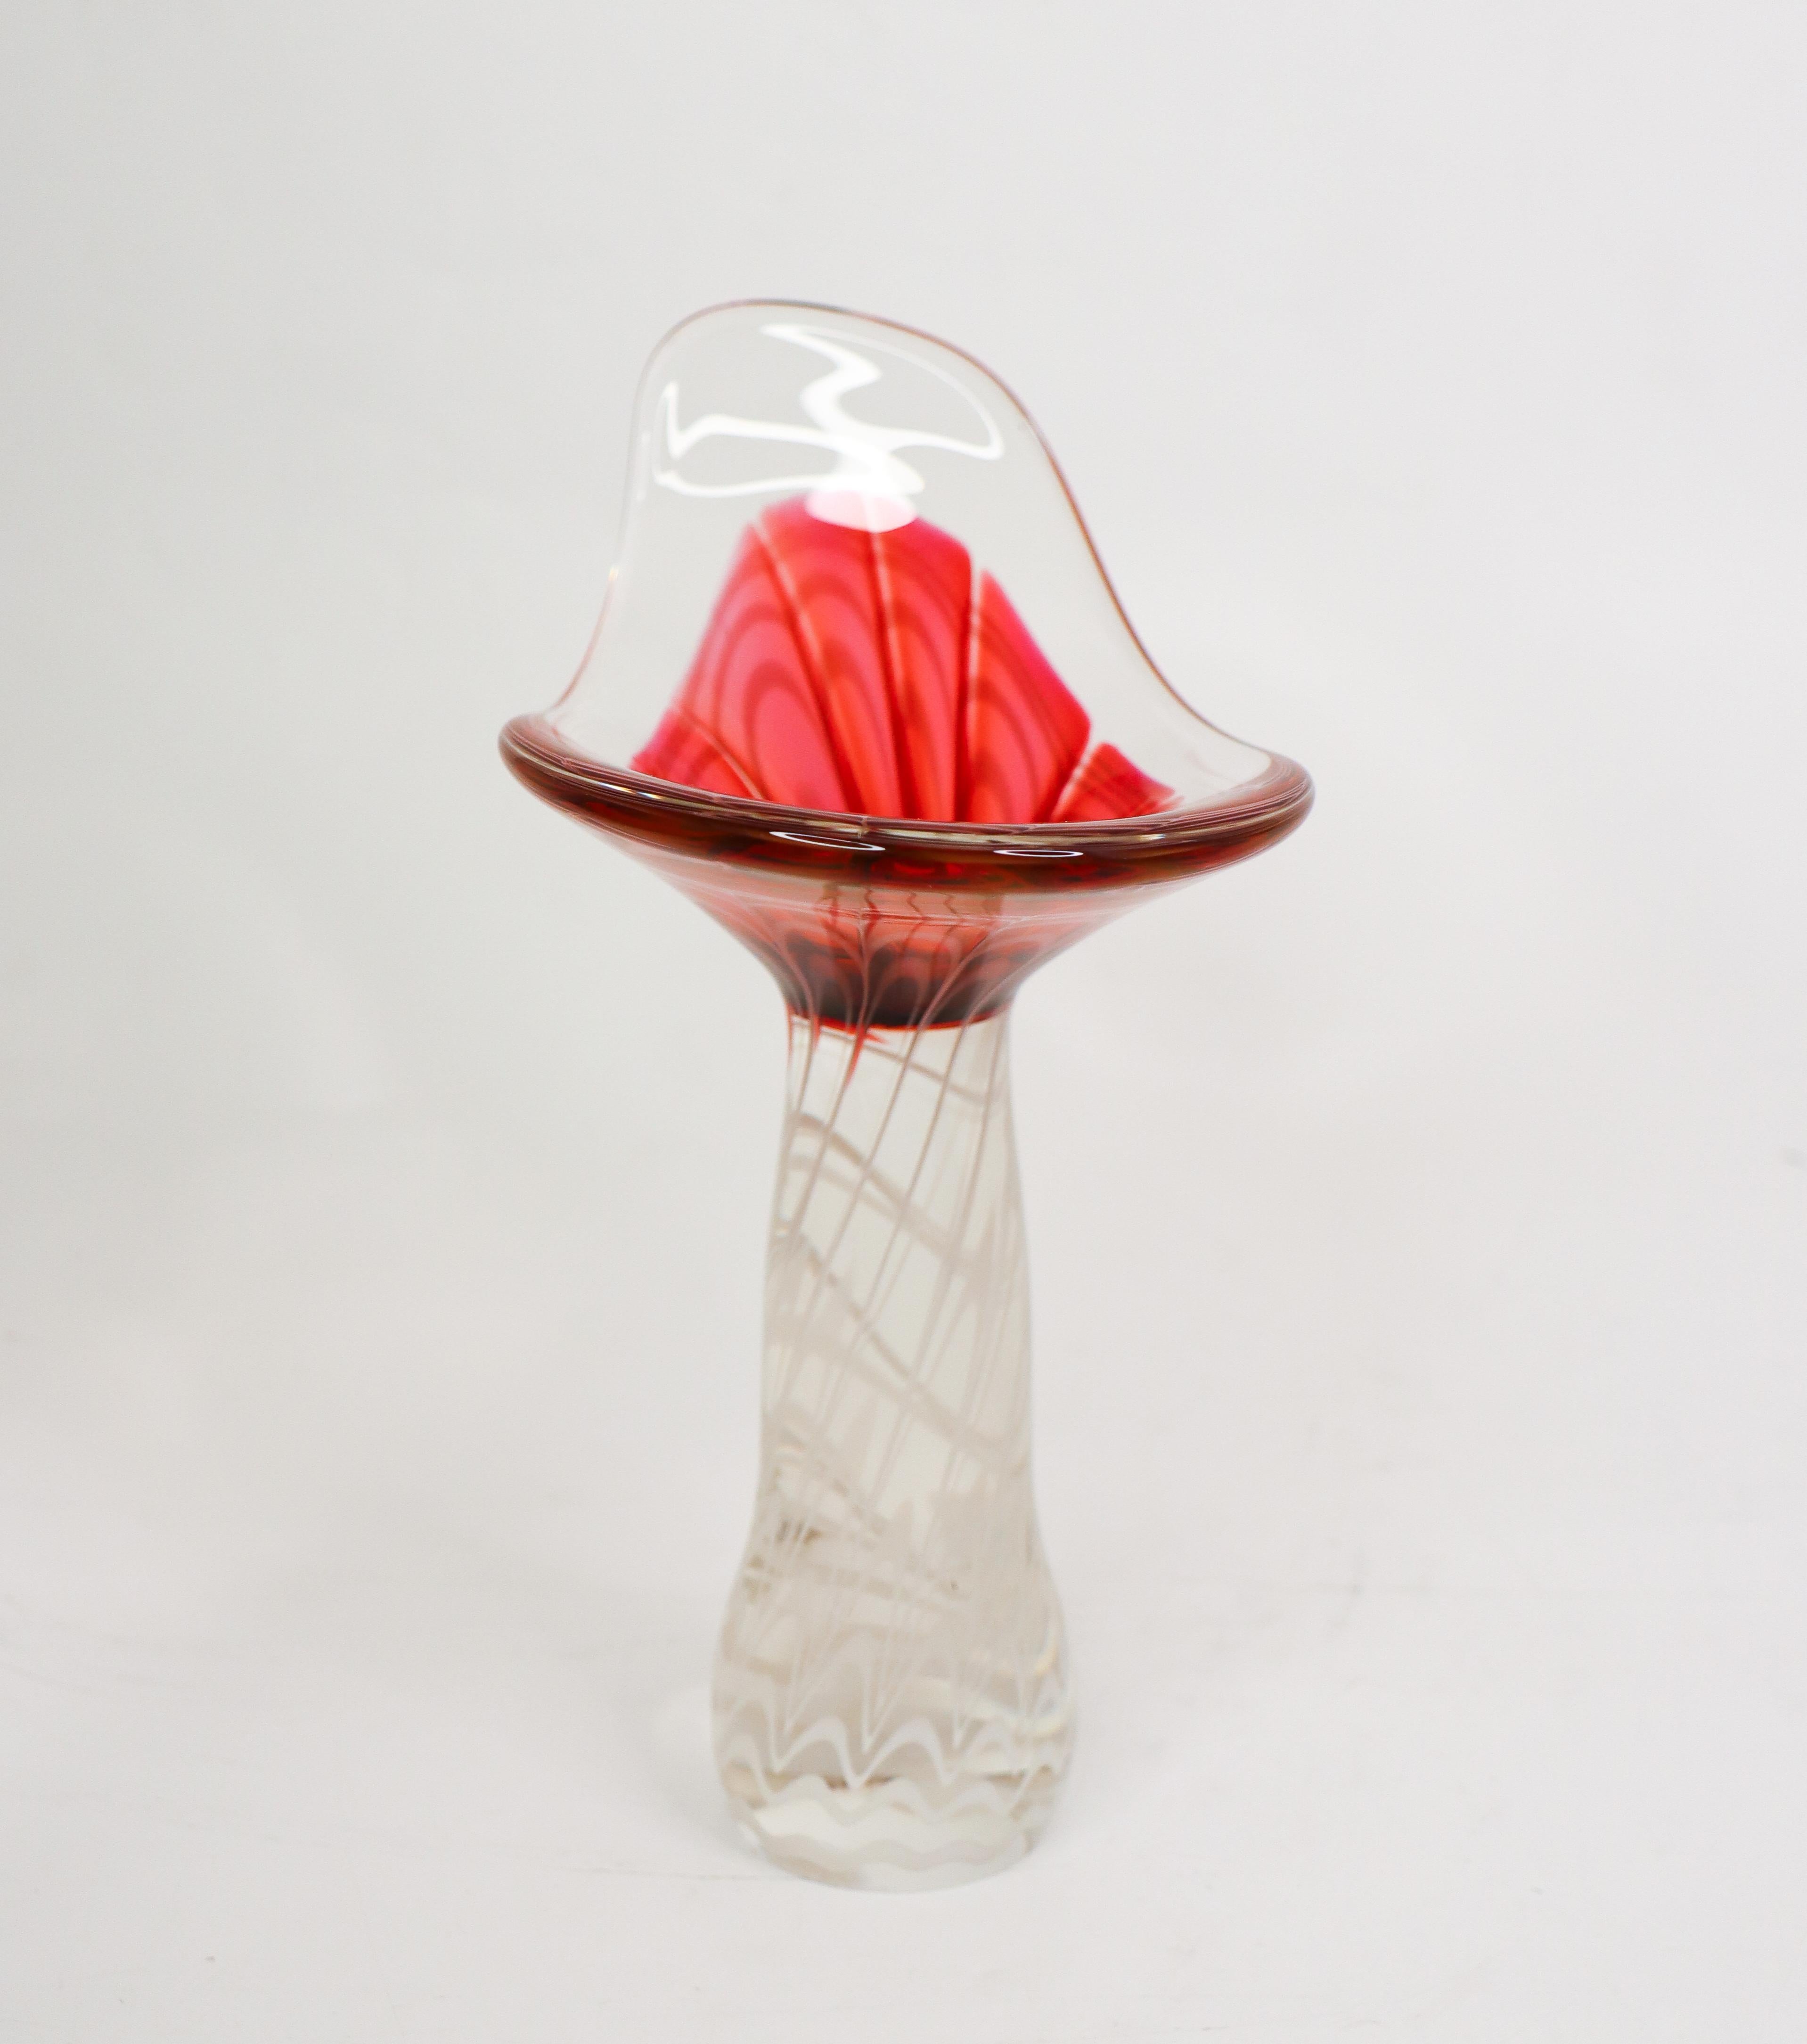 Rare Pink Glass Sculpture / Bowl, Flygsfors Paul Kedelv Mid-Century Modern In Excellent Condition For Sale In Stockholm, SE